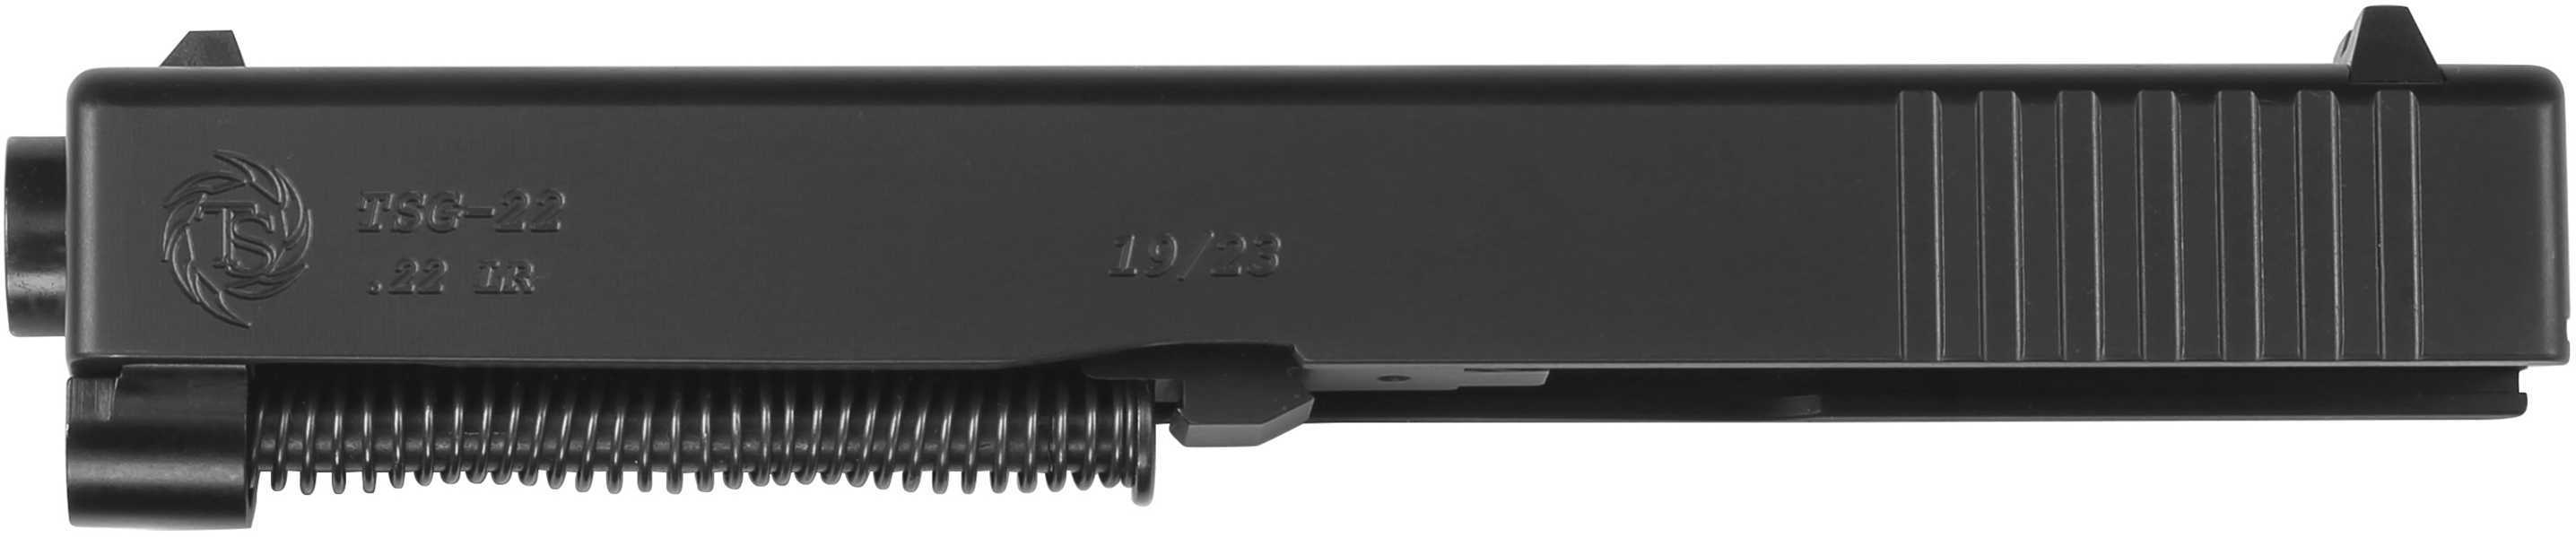 Tactical Solutions .22 Long Rifle Conversion Kit Standard Barrel, for Glock1 9, 23, 32, And 38 Md: TSG-22 19/23 Std